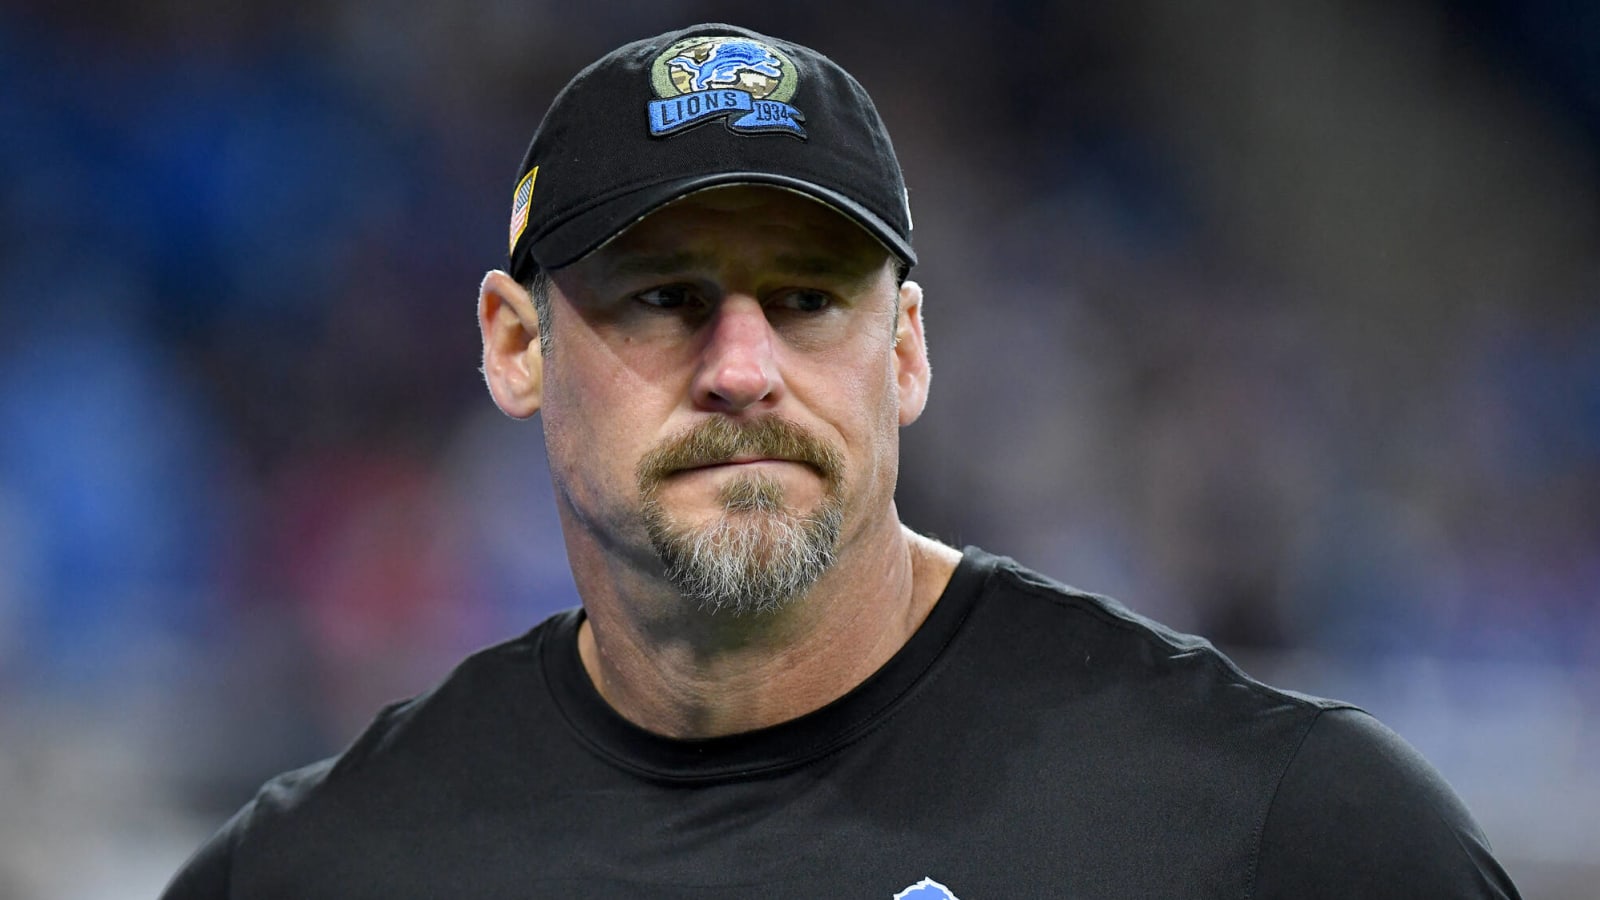 Dan Campbell sends message to Lions fan ahead of heart surgery